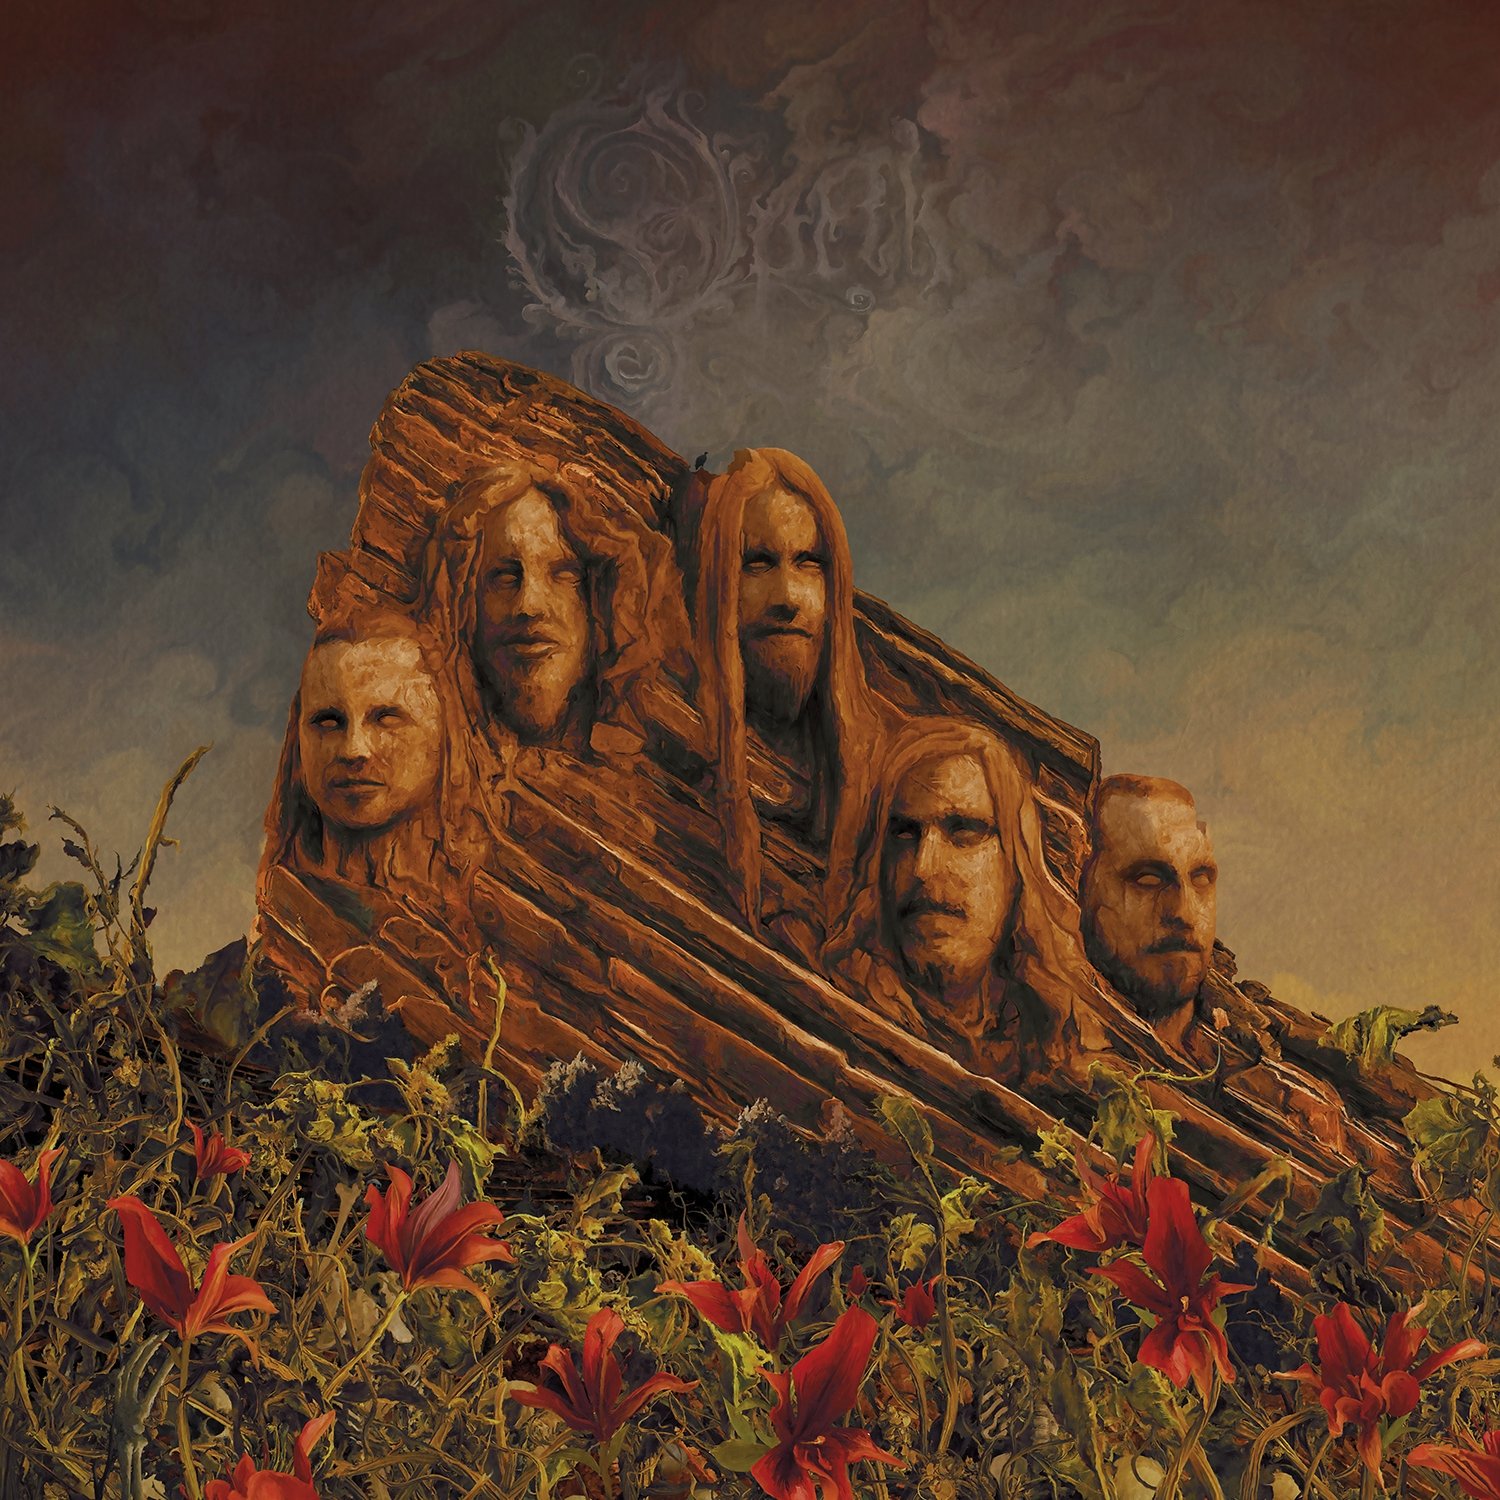 Opeth - Garden Of The Titans (Opeth Live at Red Rocks Amphitheatre) - Artwork